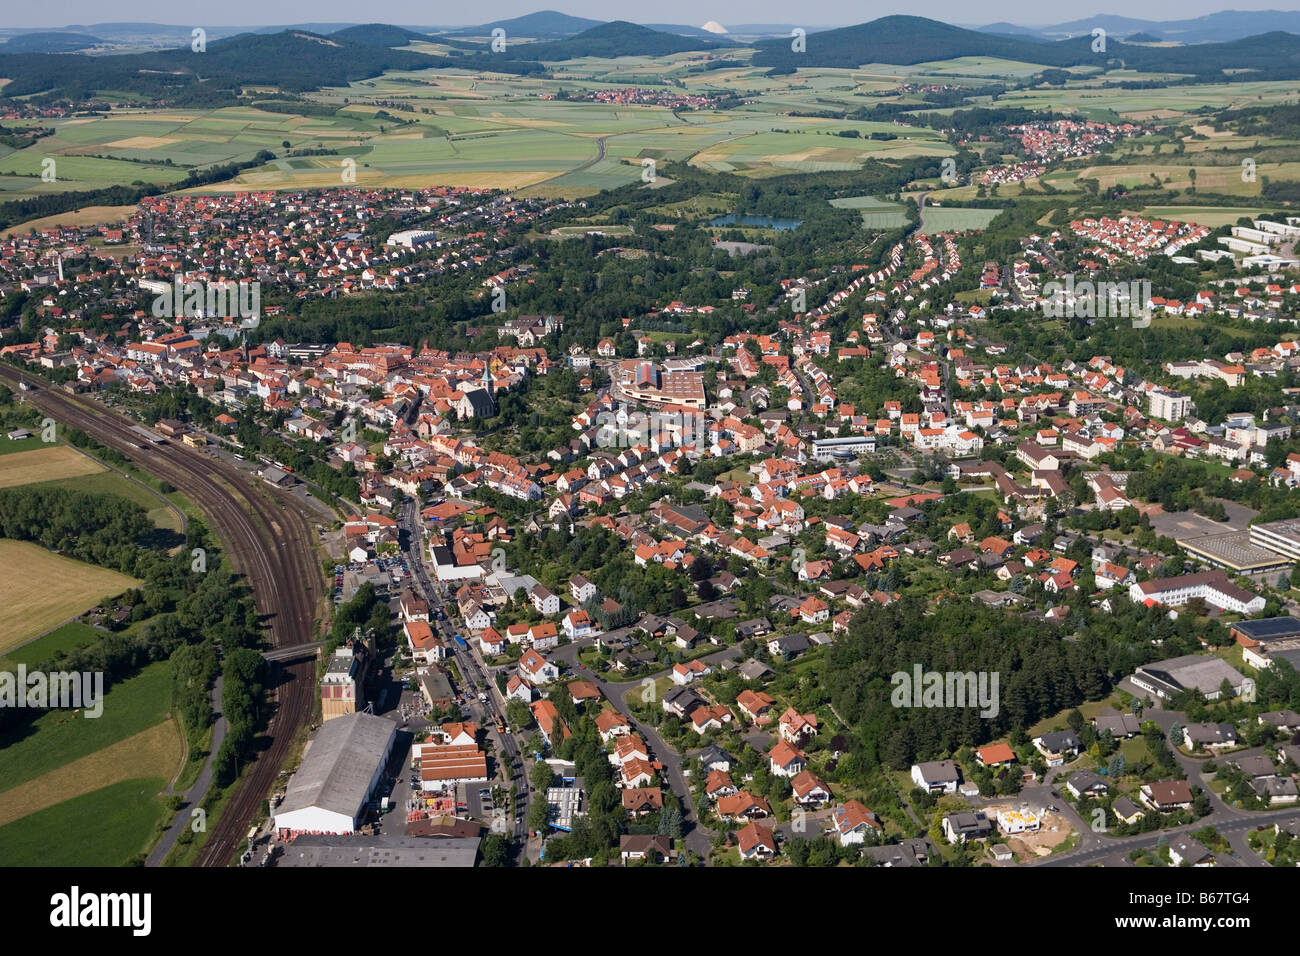 Aerial Photo of Huenfeld and Hessisches Kegelspiel Mountains, Huenfeld, Rhoen, Hesse, Germany Stock Photo